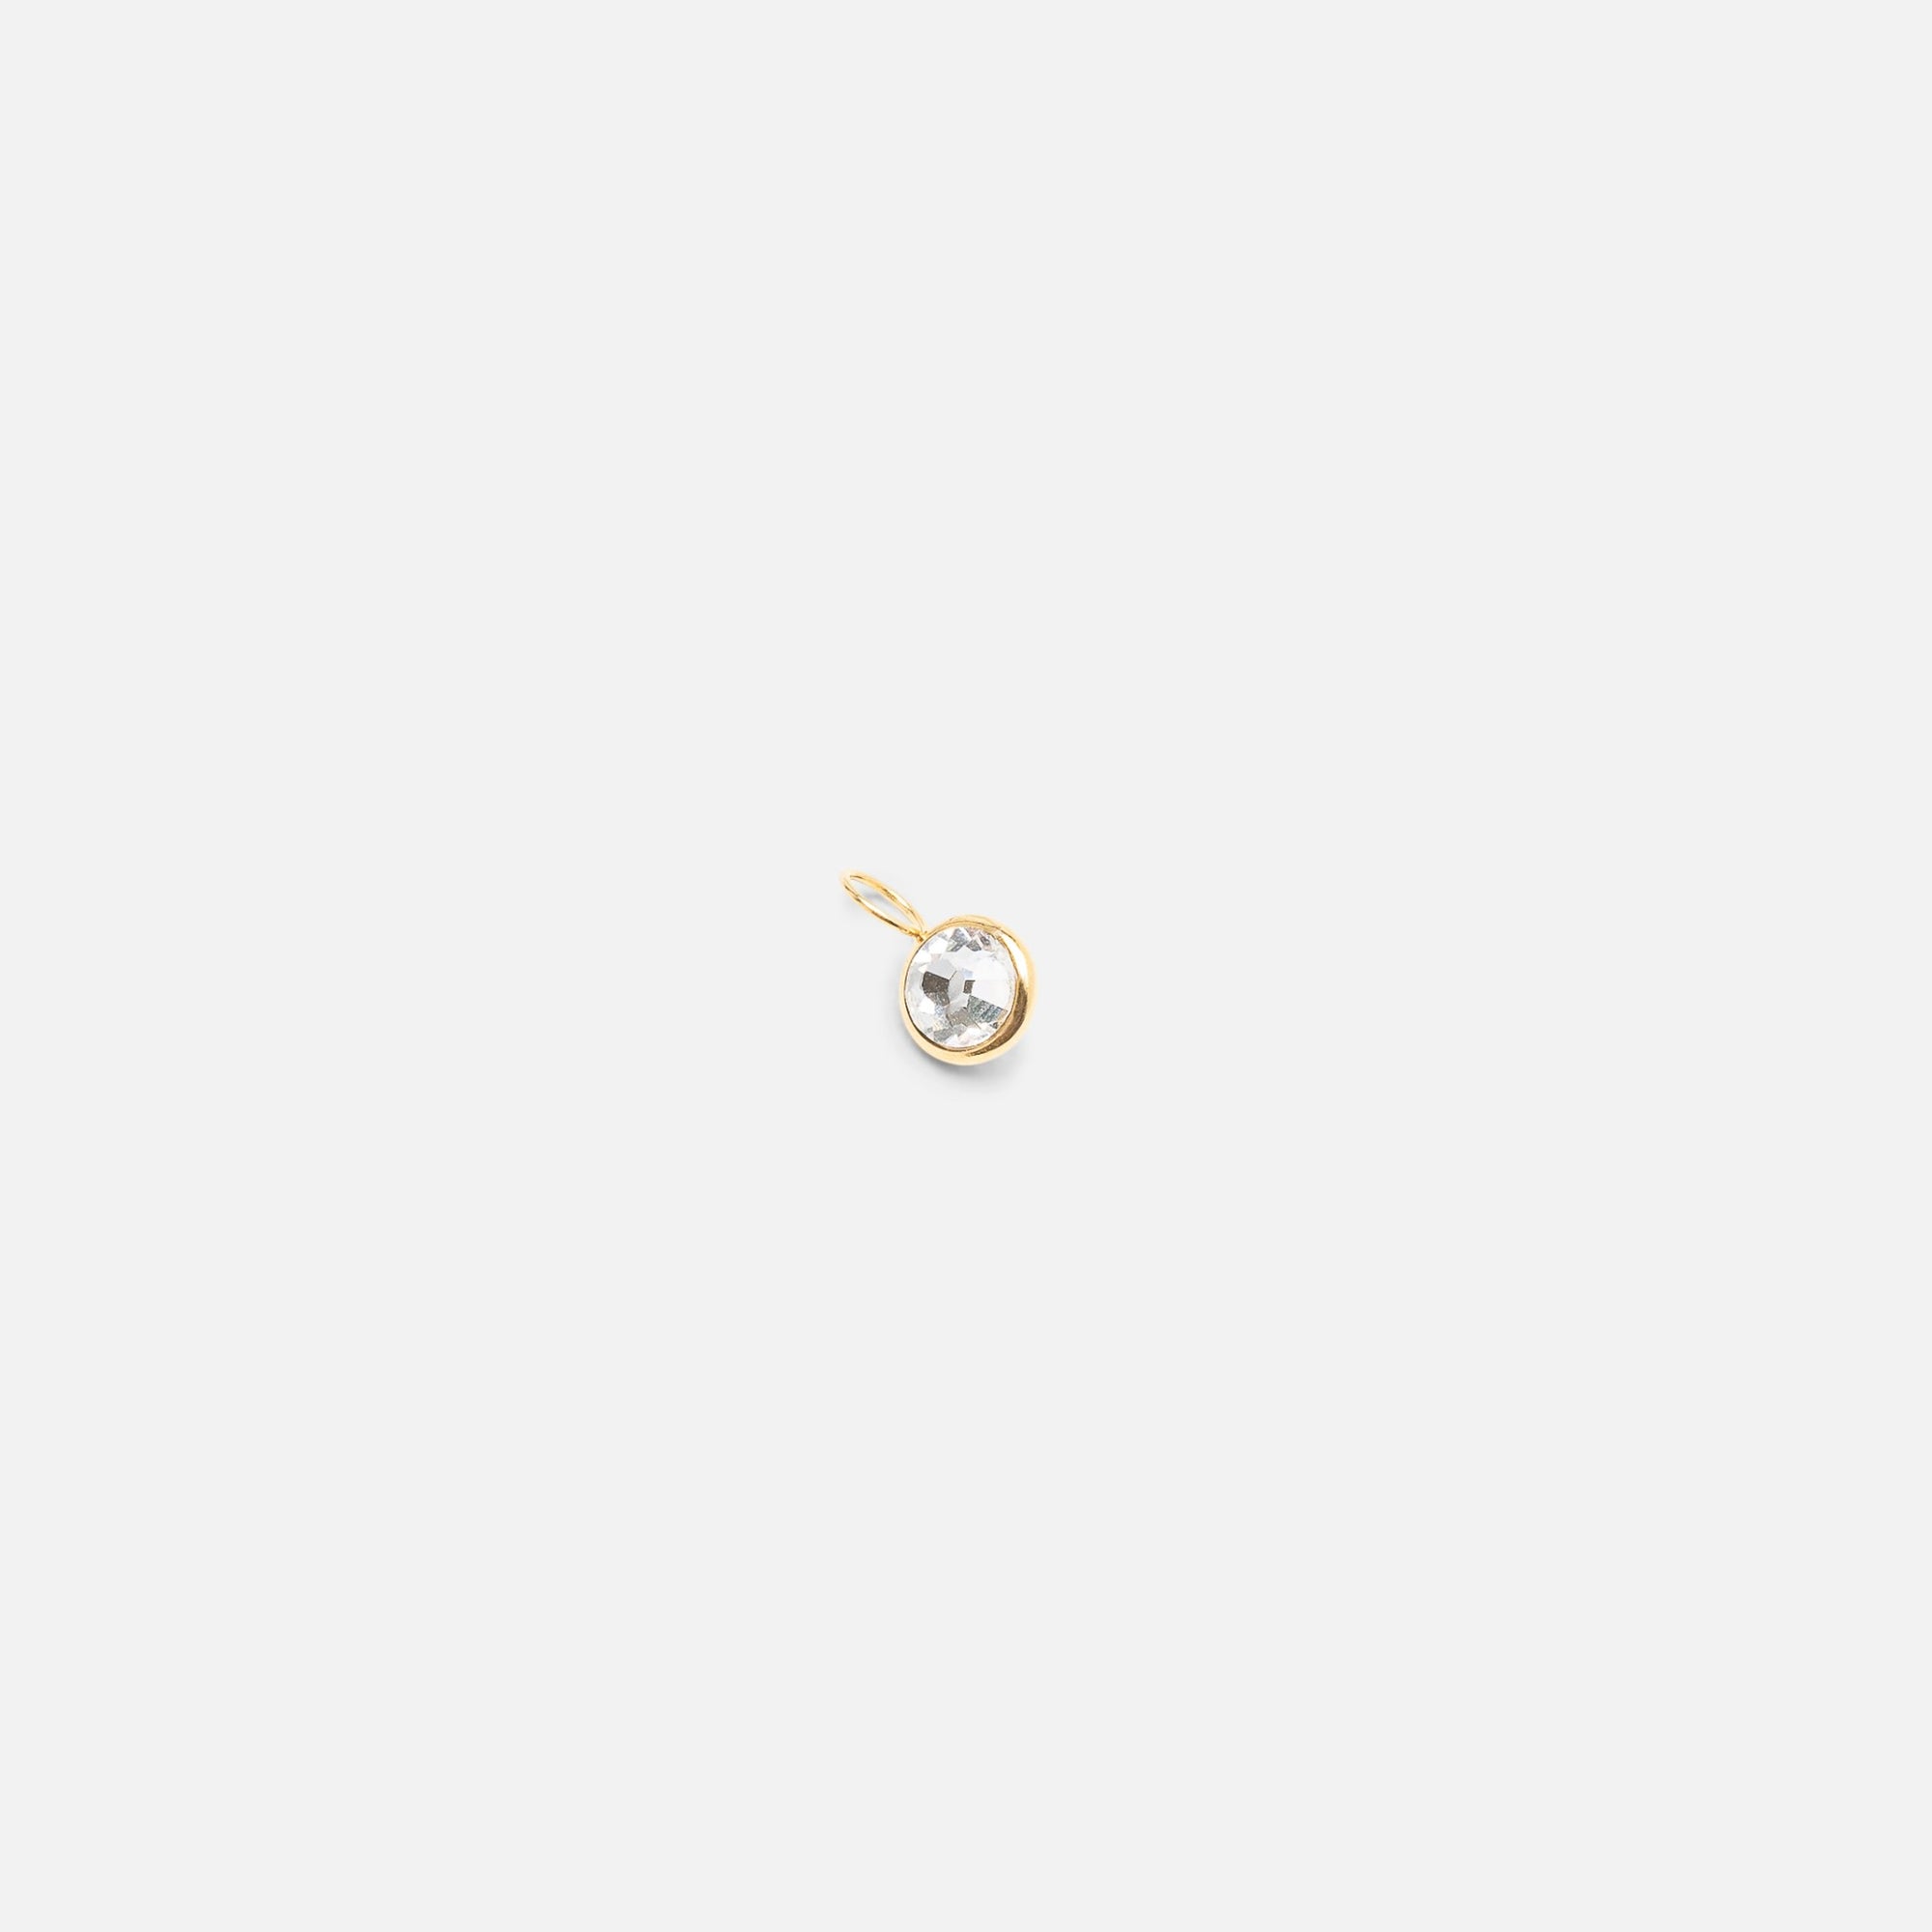 Small golden charm with cubic zirconia